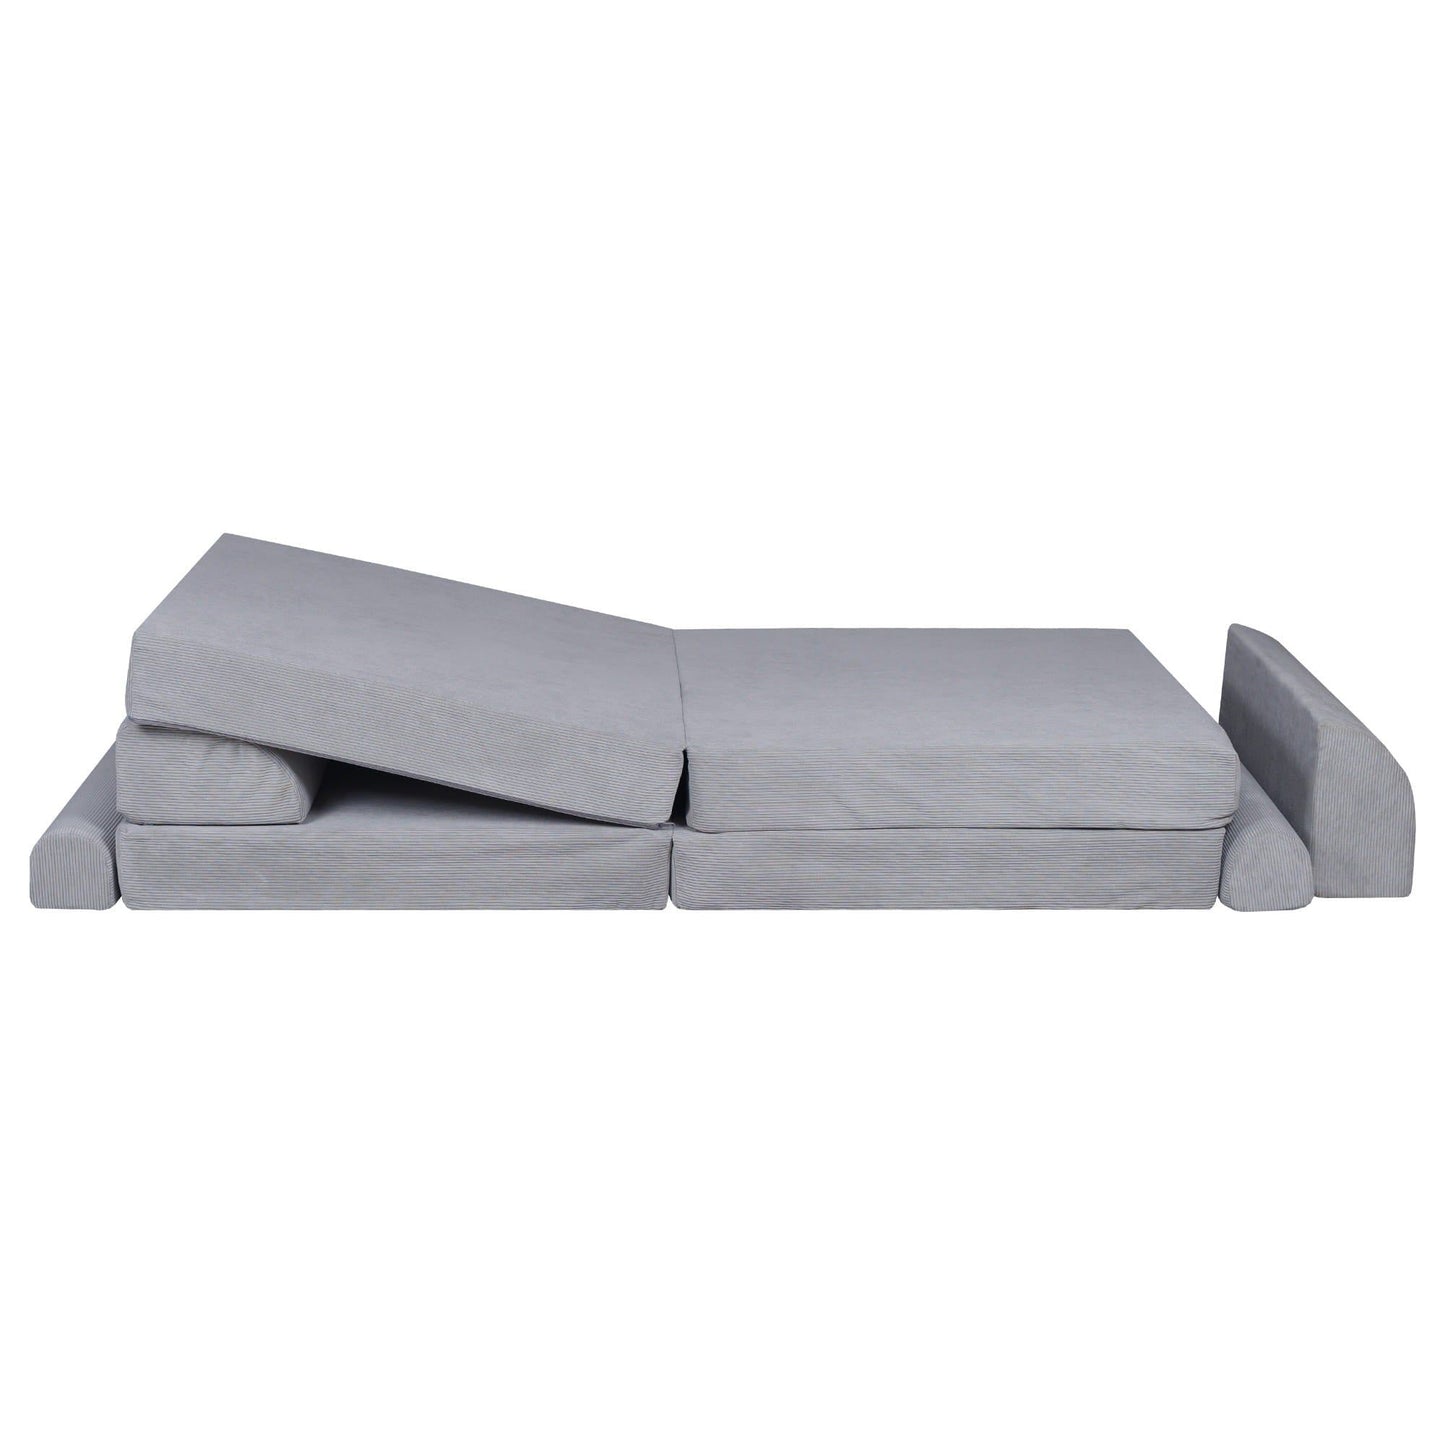 MeowBaby Kids Soft Play Sofa & Fold Out Bed - Corduroy Grey with one end raised